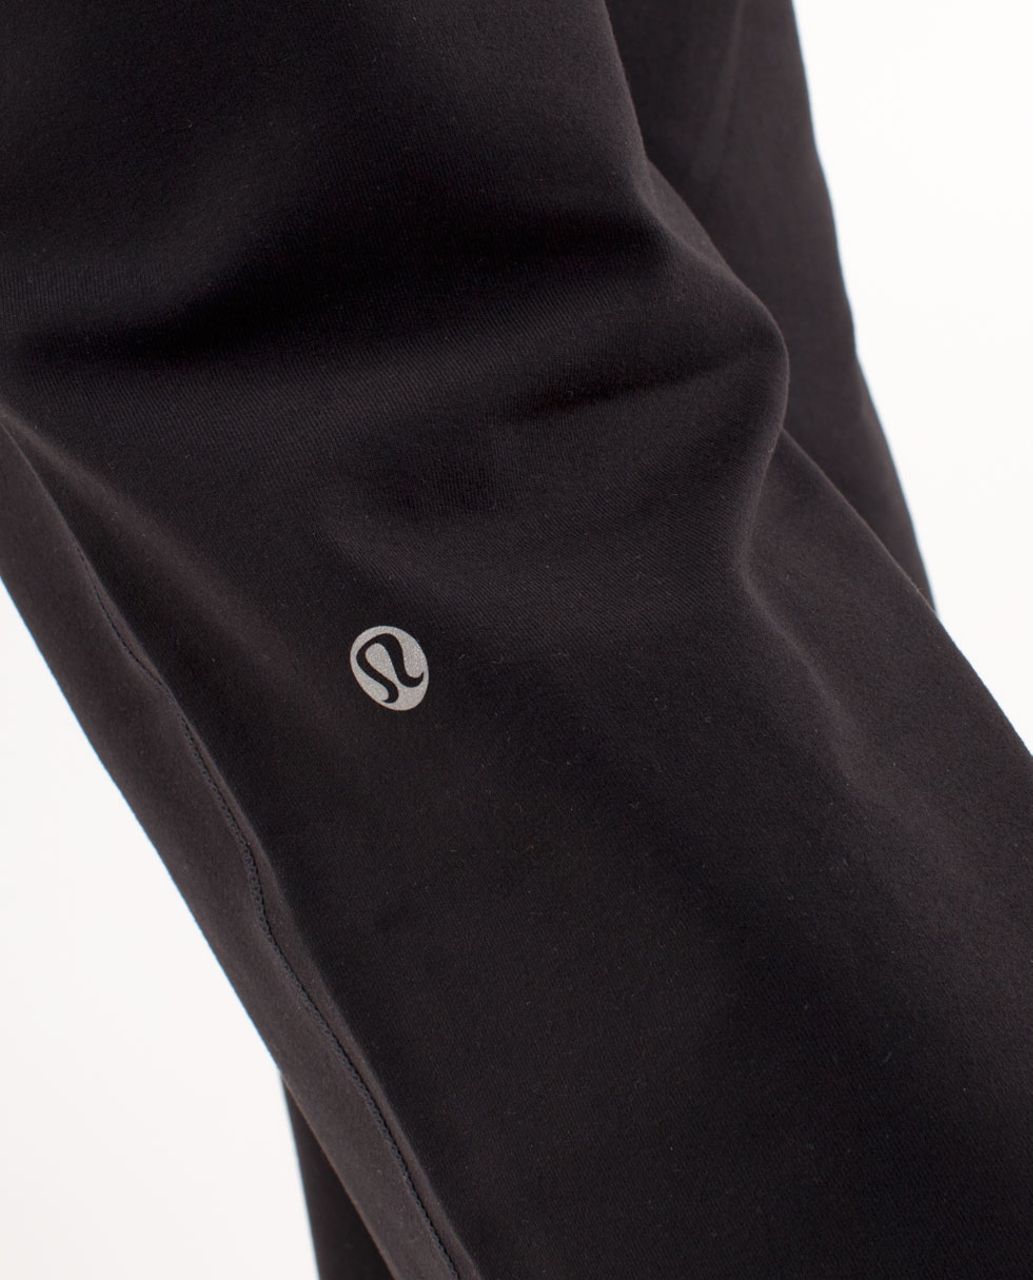 Lululemon Astro Pant (Tall) - Black /  Fossil /  Wee Are From Space Coal Fossil